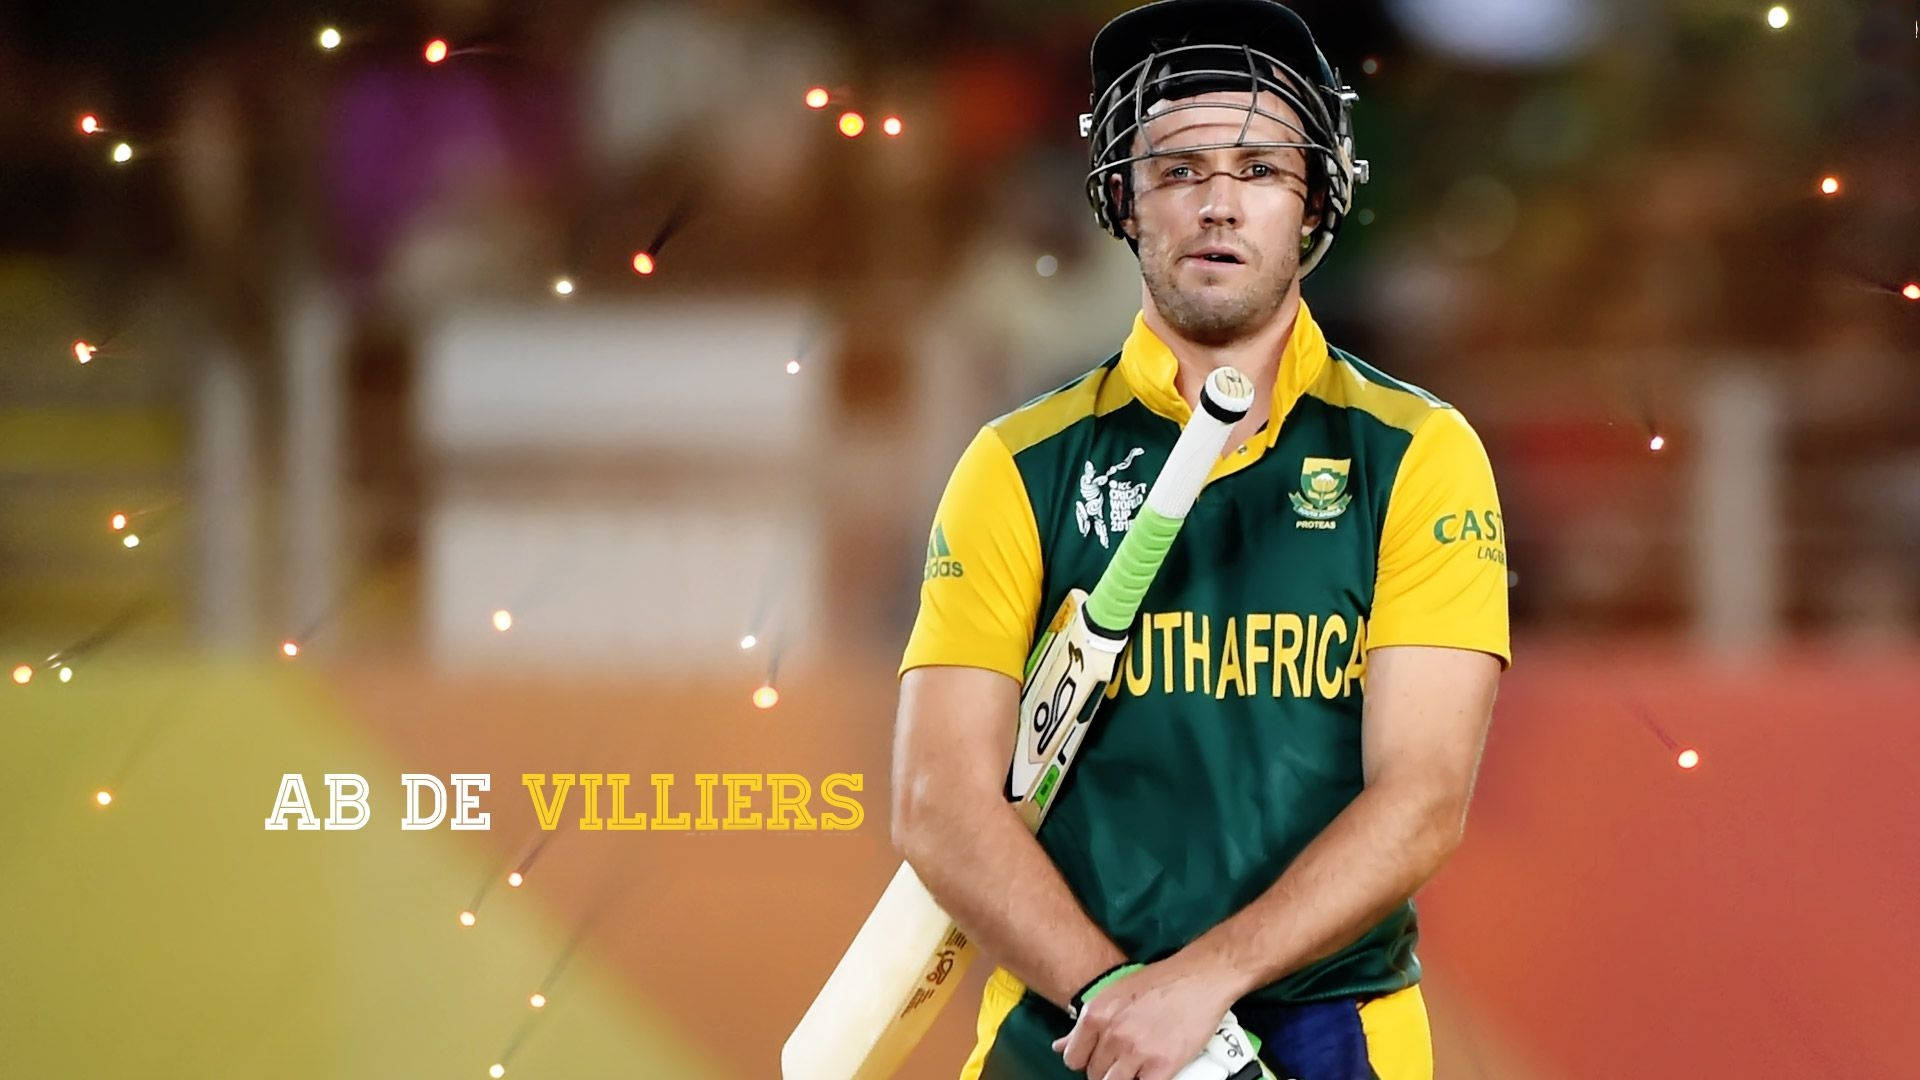 Download ABD wallpaper wallpaper by SueFalls13  eb  Free on ZEDGE now  Browse millions of popular abd  Ab de villiers photo Ab de villiers Ab  de villiers ipl